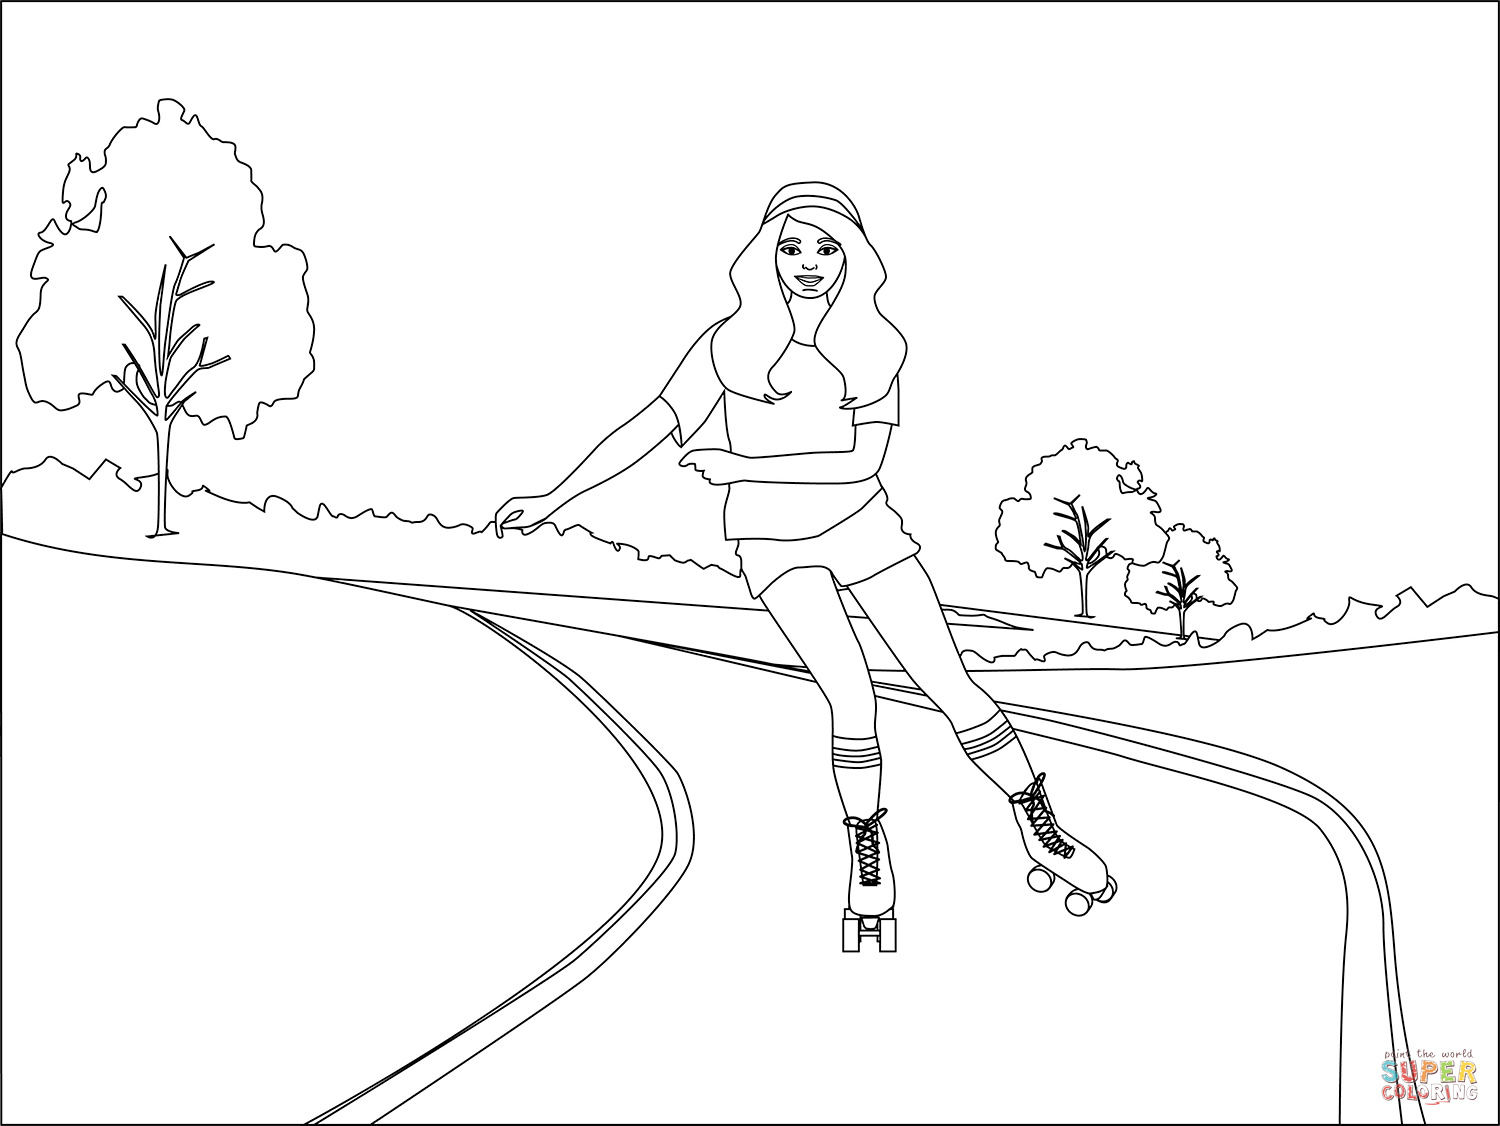 Roller Skating coloring page | Free Printable Coloring Pages